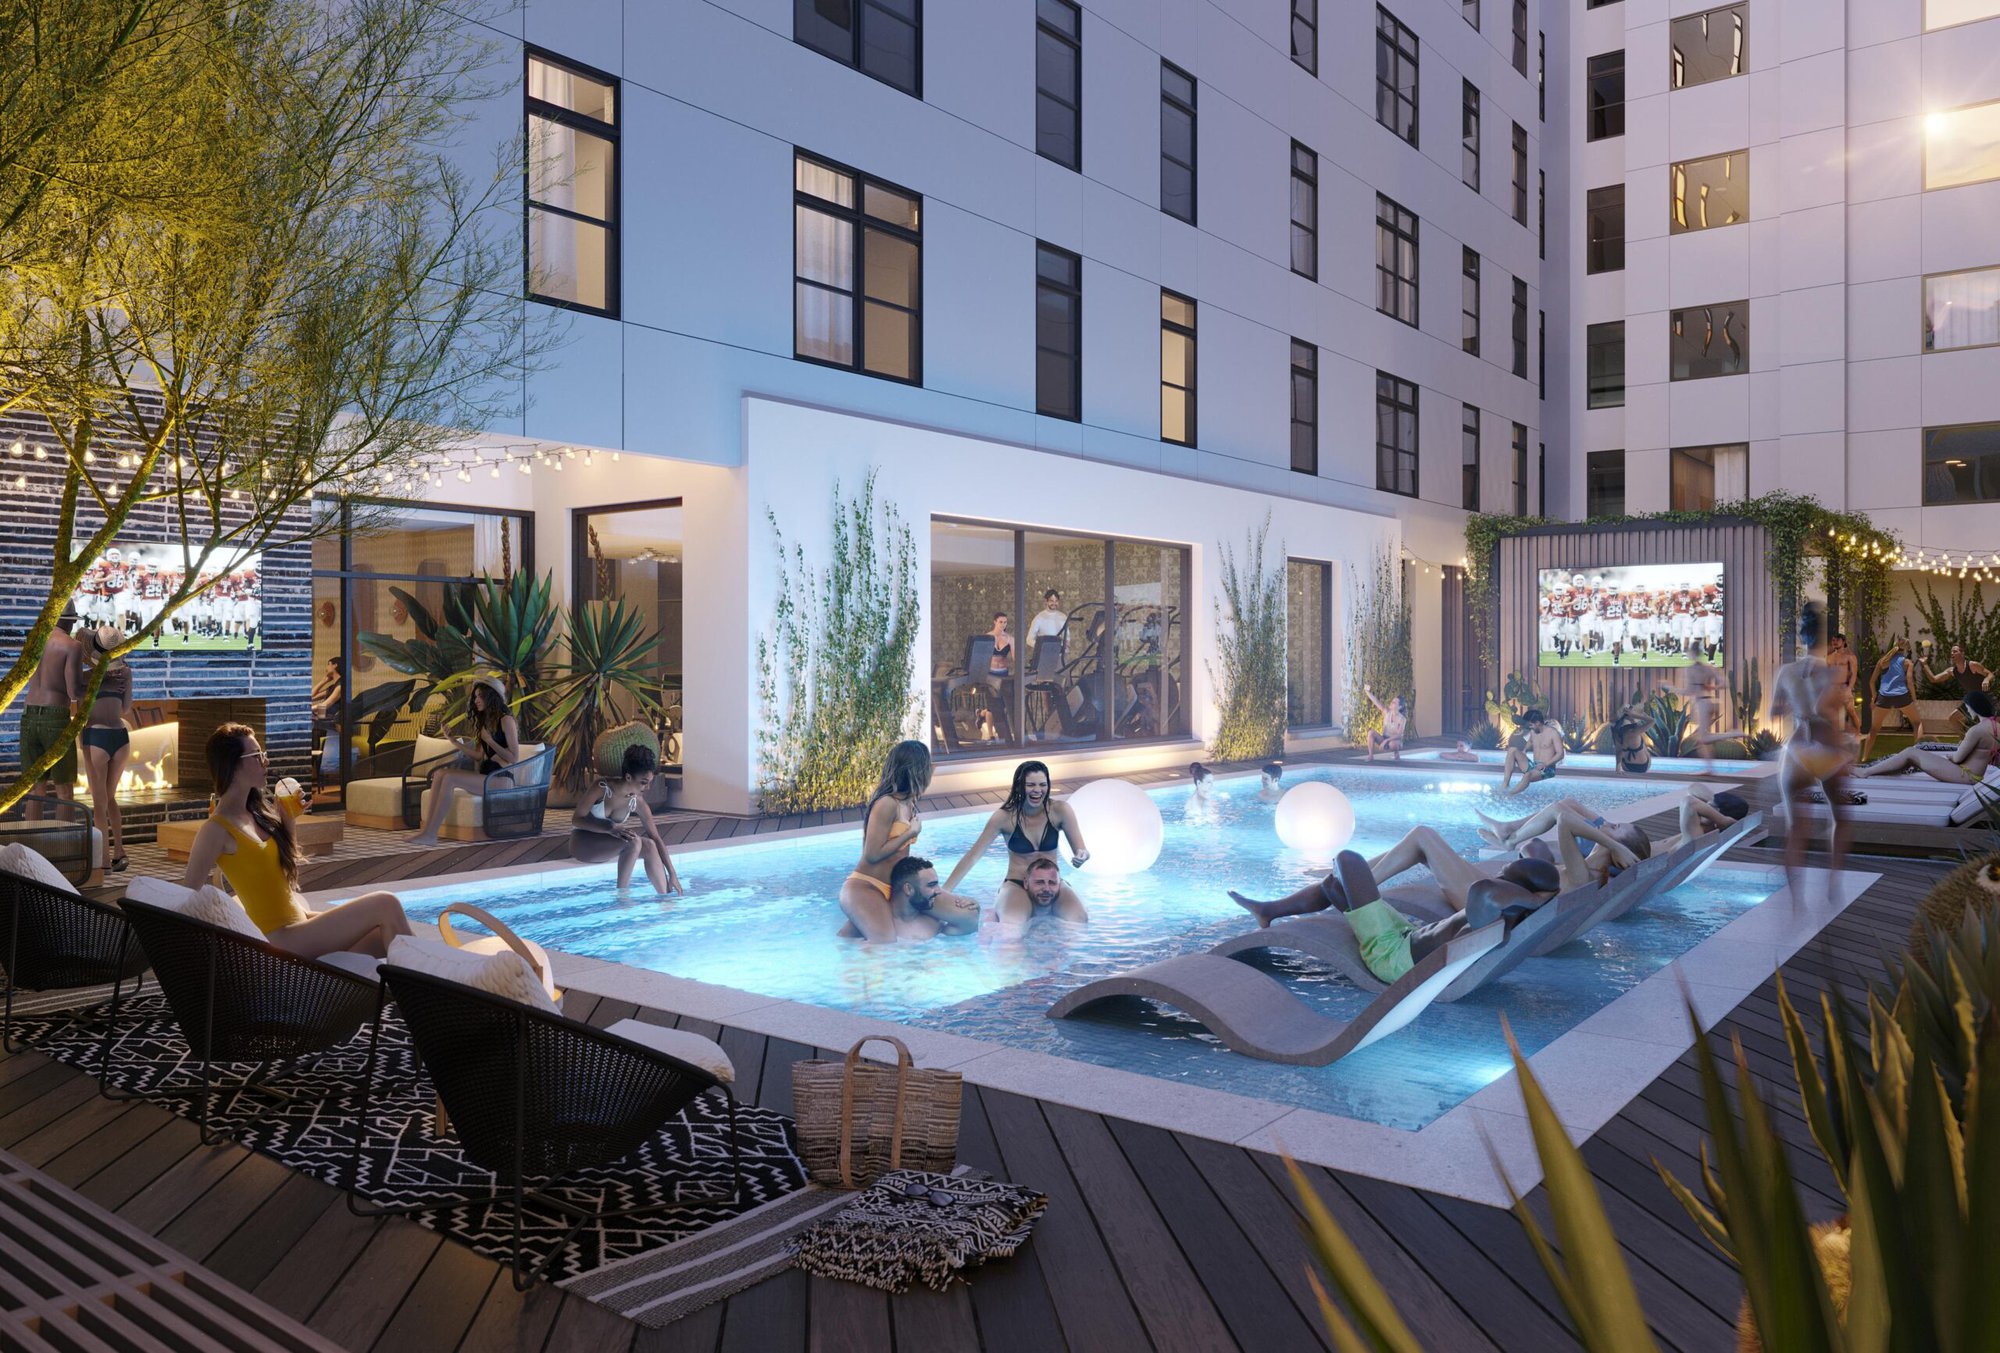 The pool and jumbotron rendering at Rambler Austin with students hanging out outside.